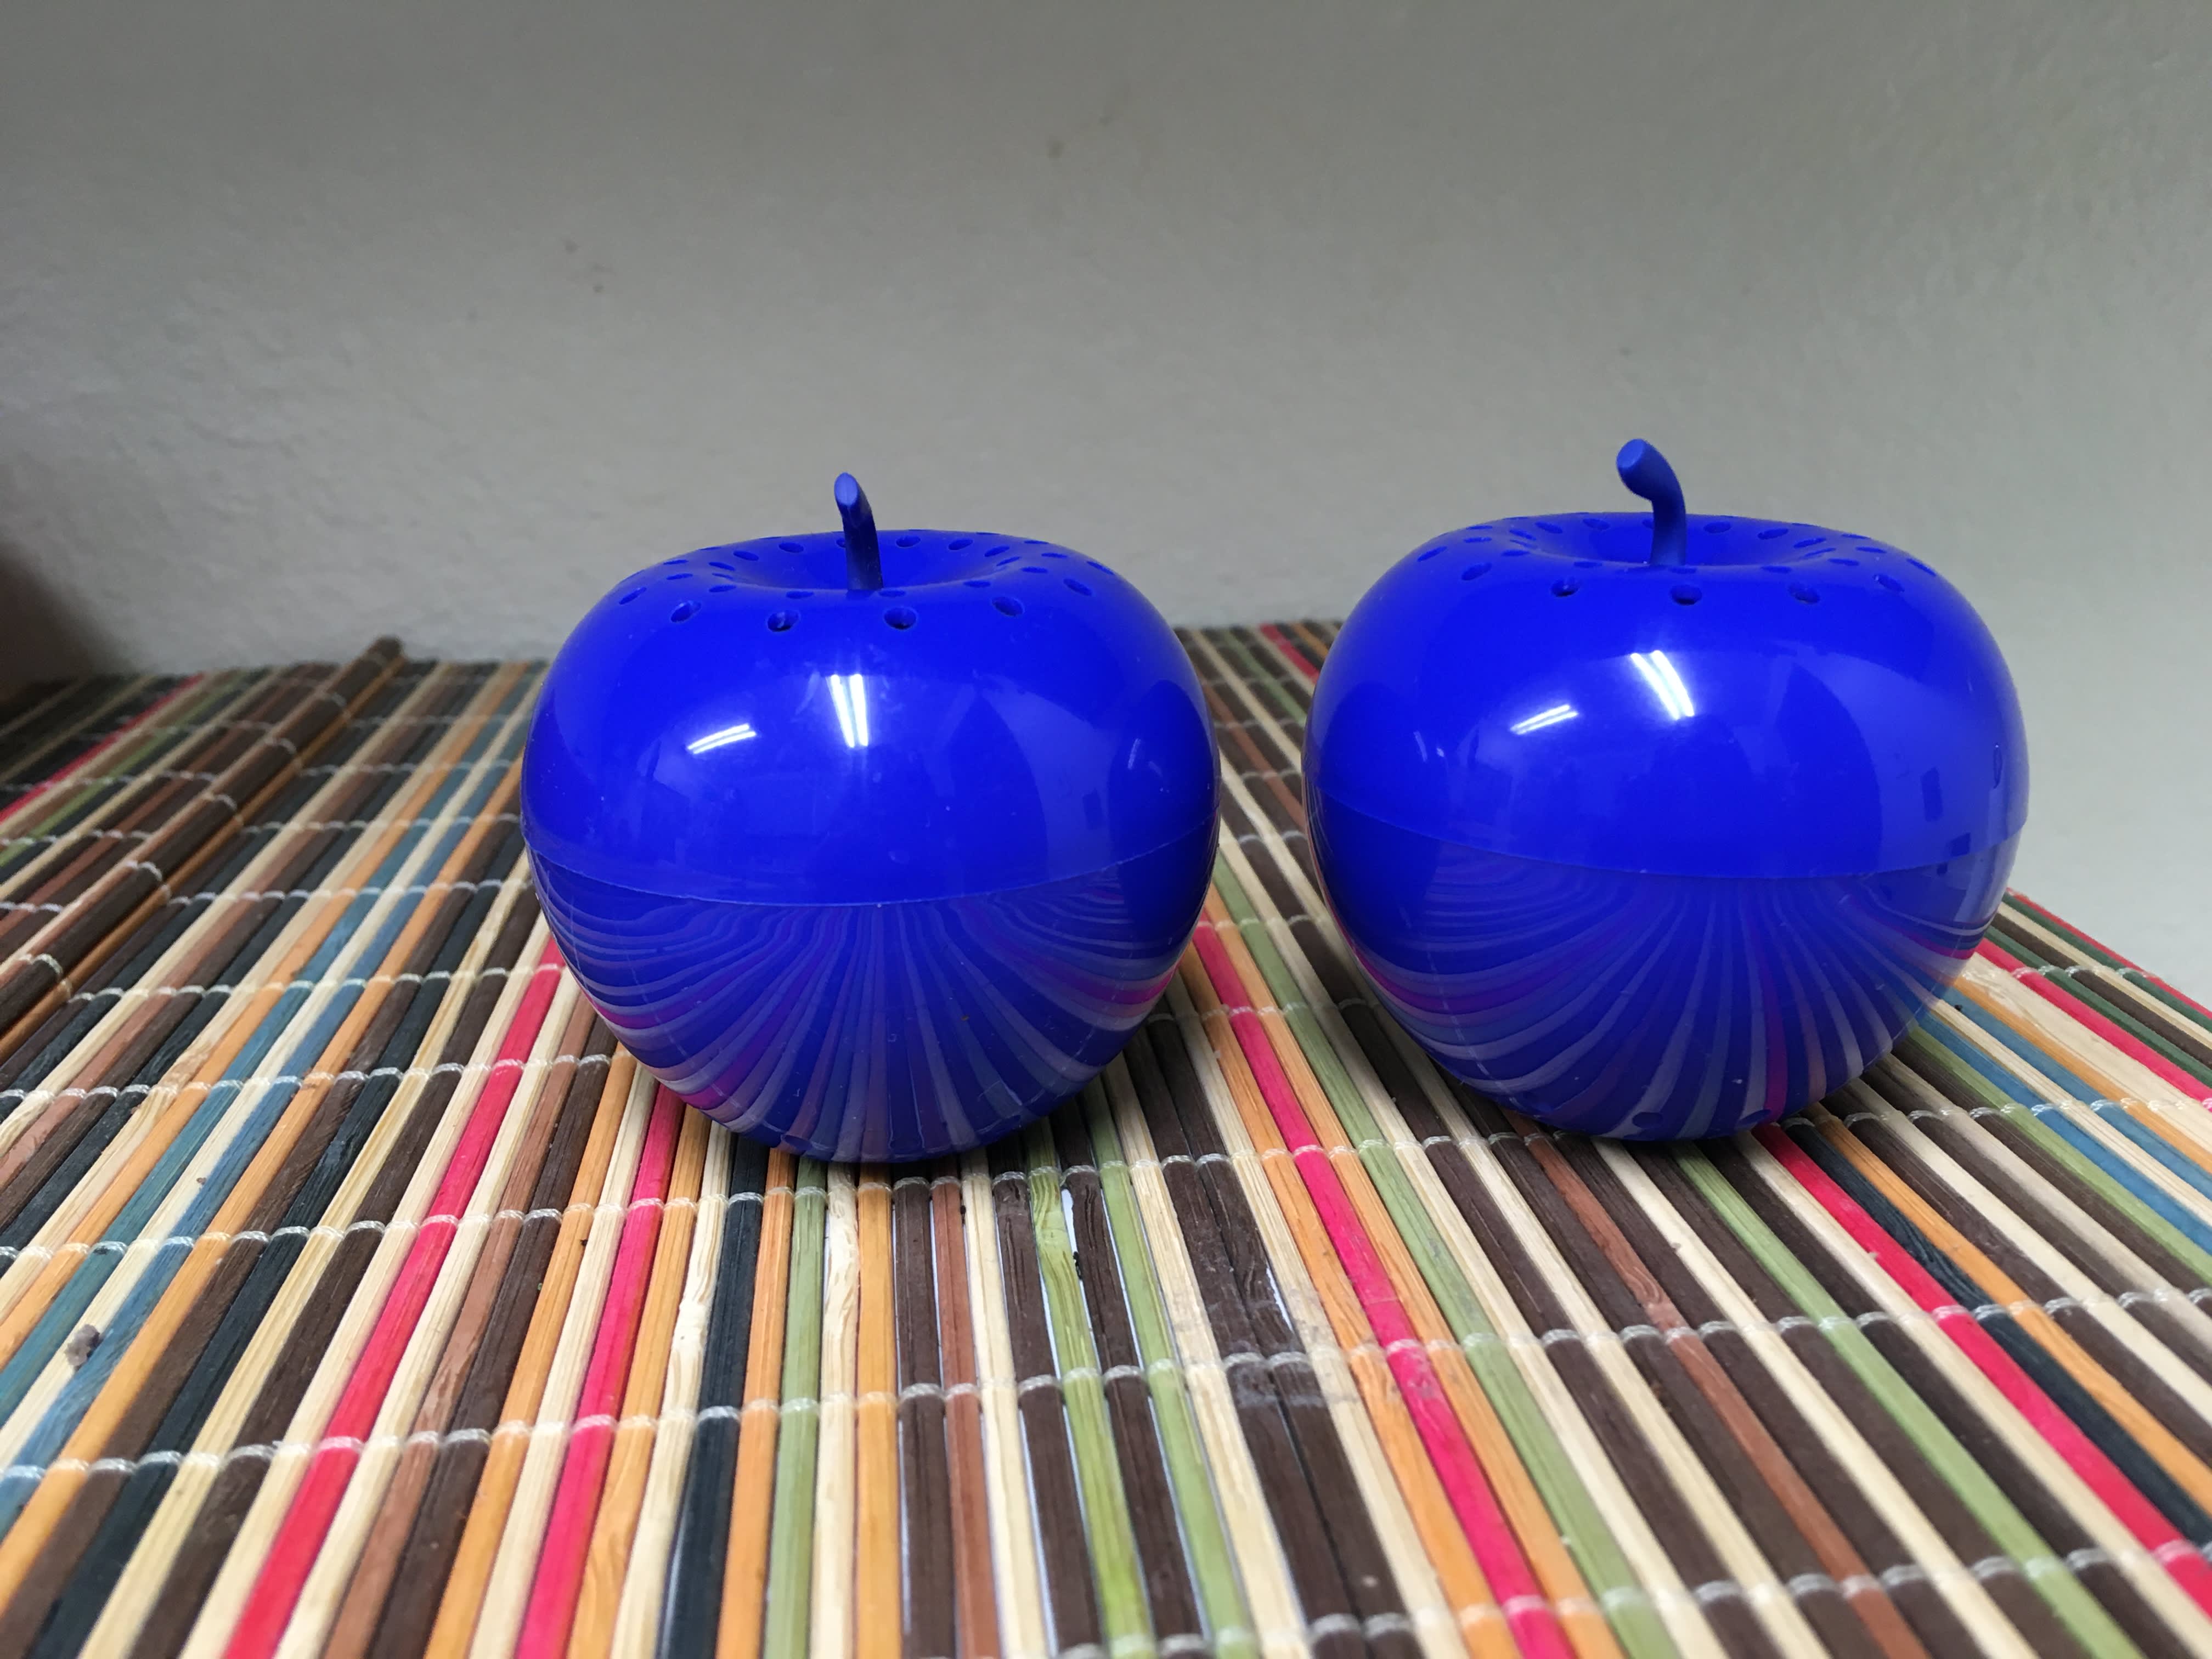 Bluapple Produce Saver Review 2022